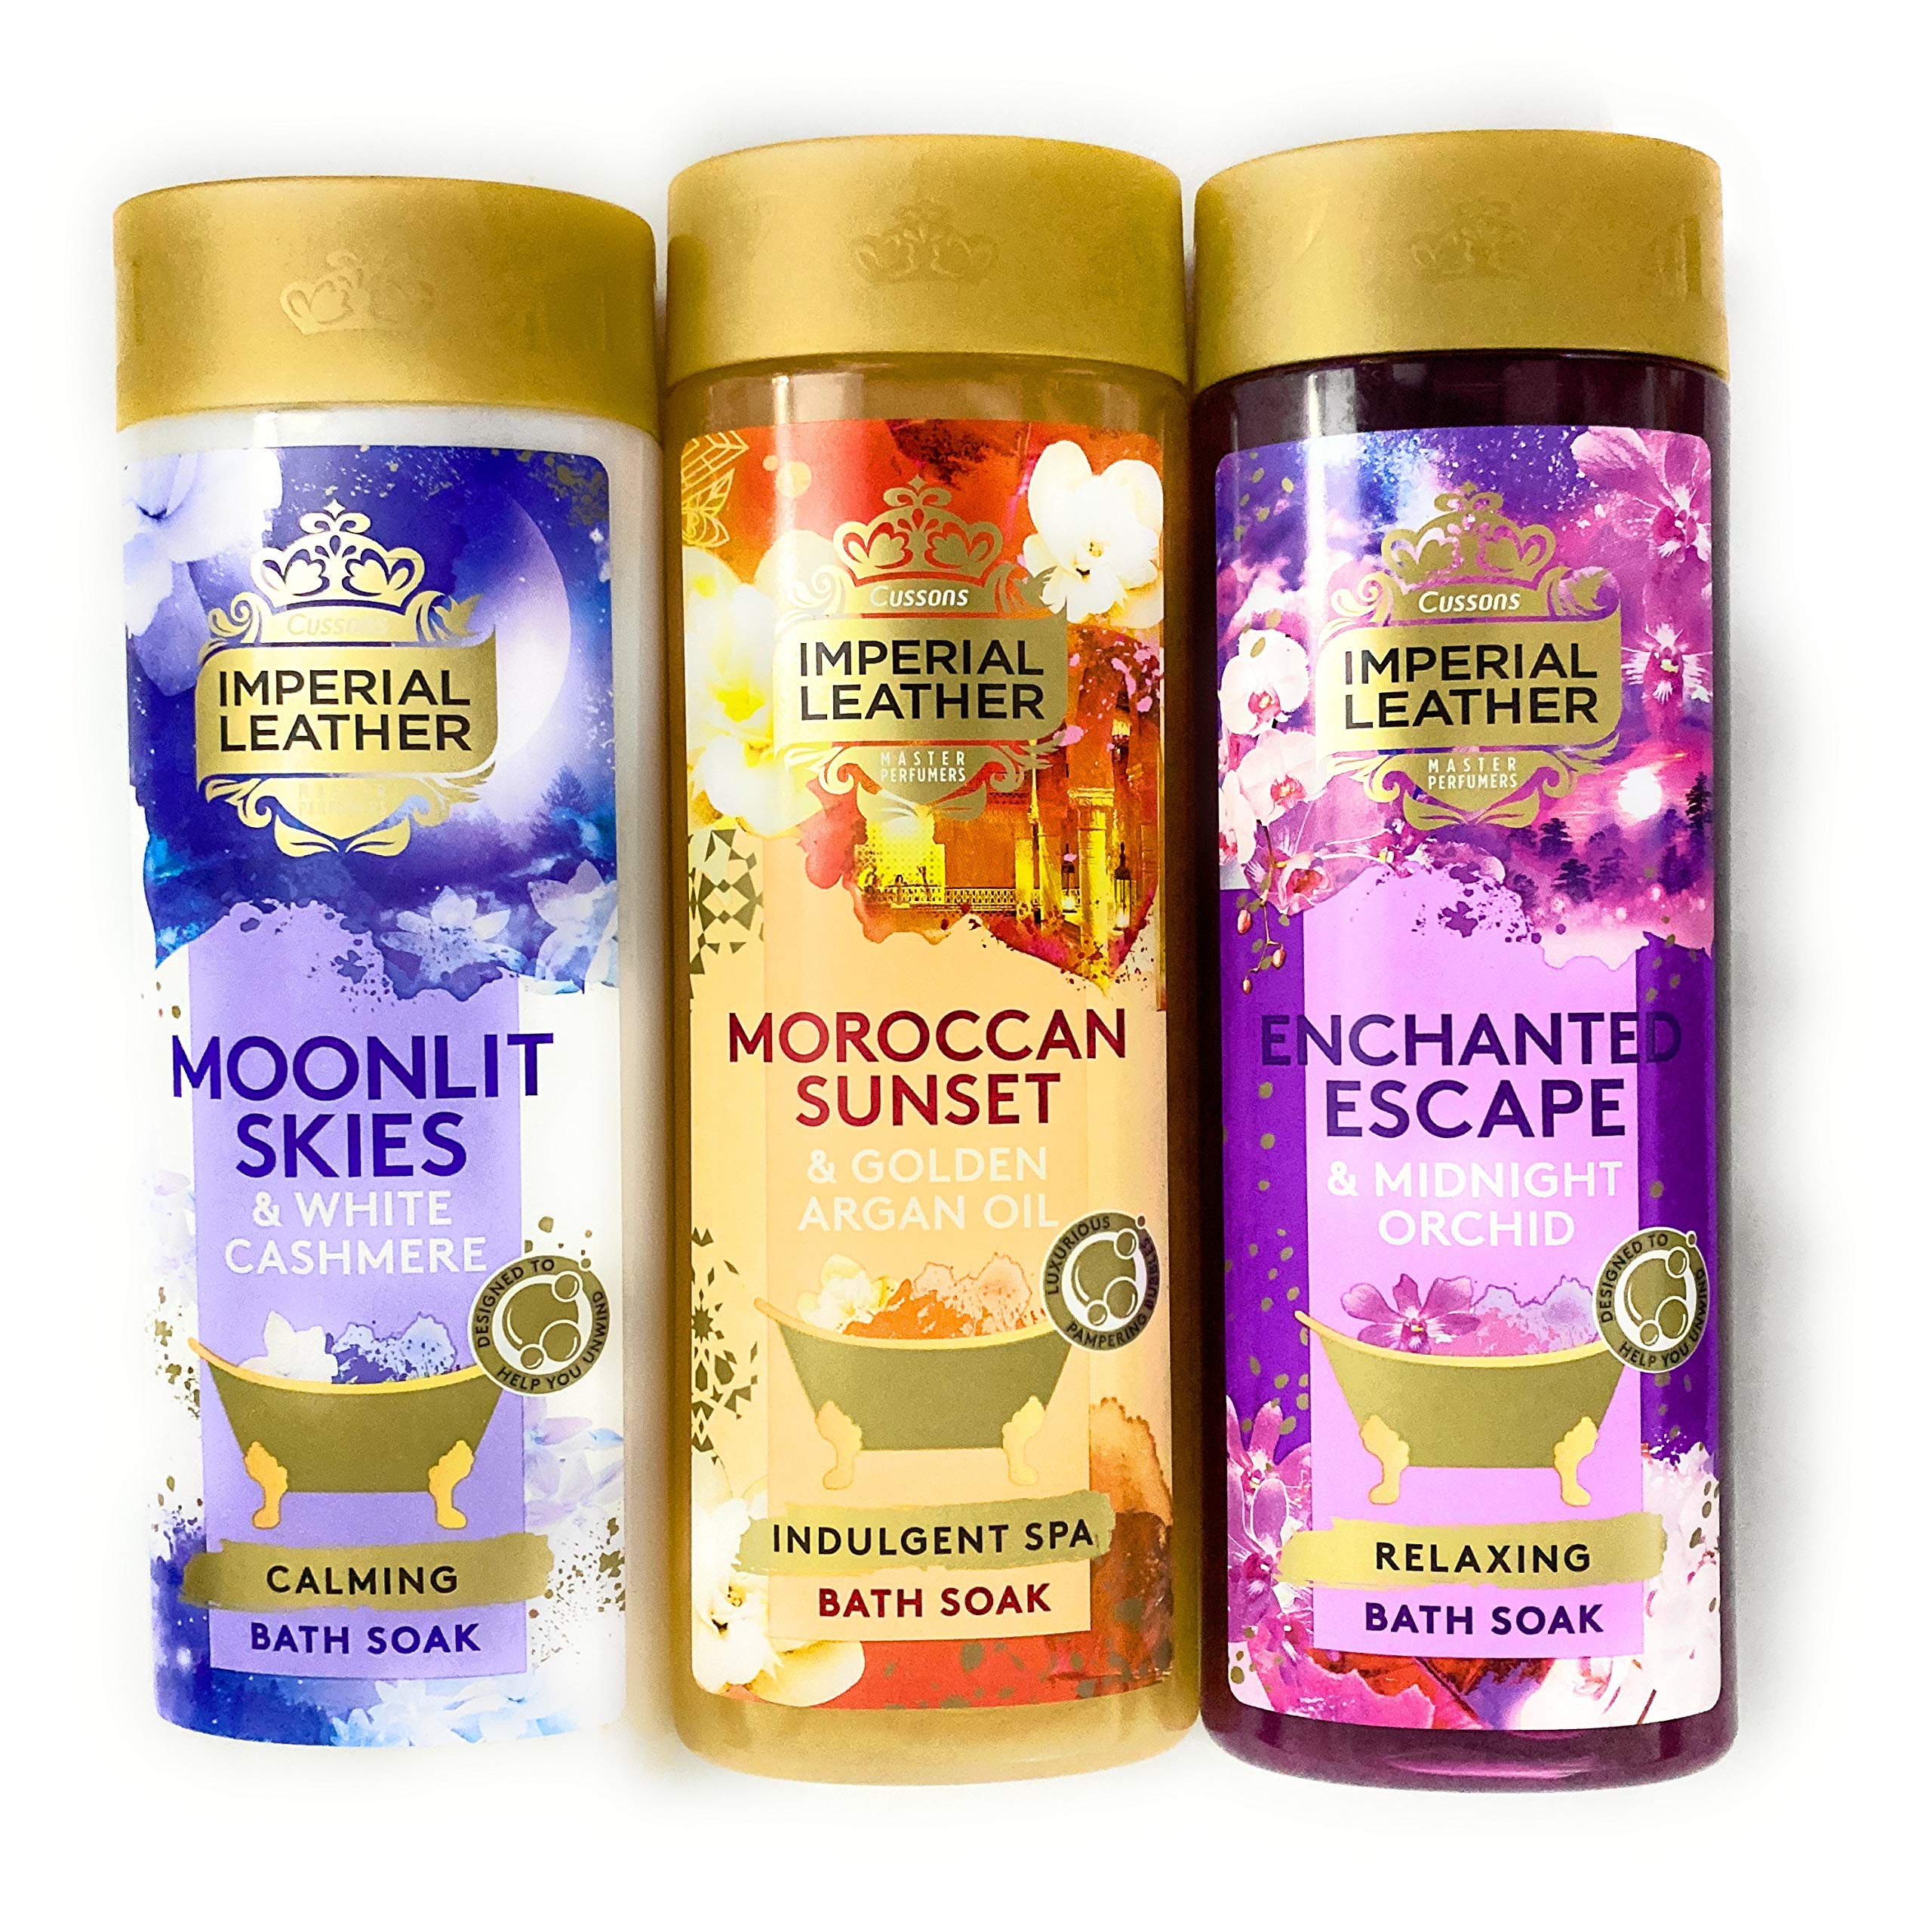 Imperial Leather Bath Soak Set 3 x 500ml. Enchanted Escape & Midnight Orchid - Relaxing, Moroccan Sunset & Argan Oil - Indulgent Spa and Moonlit Skies & White Cashmere - Calming